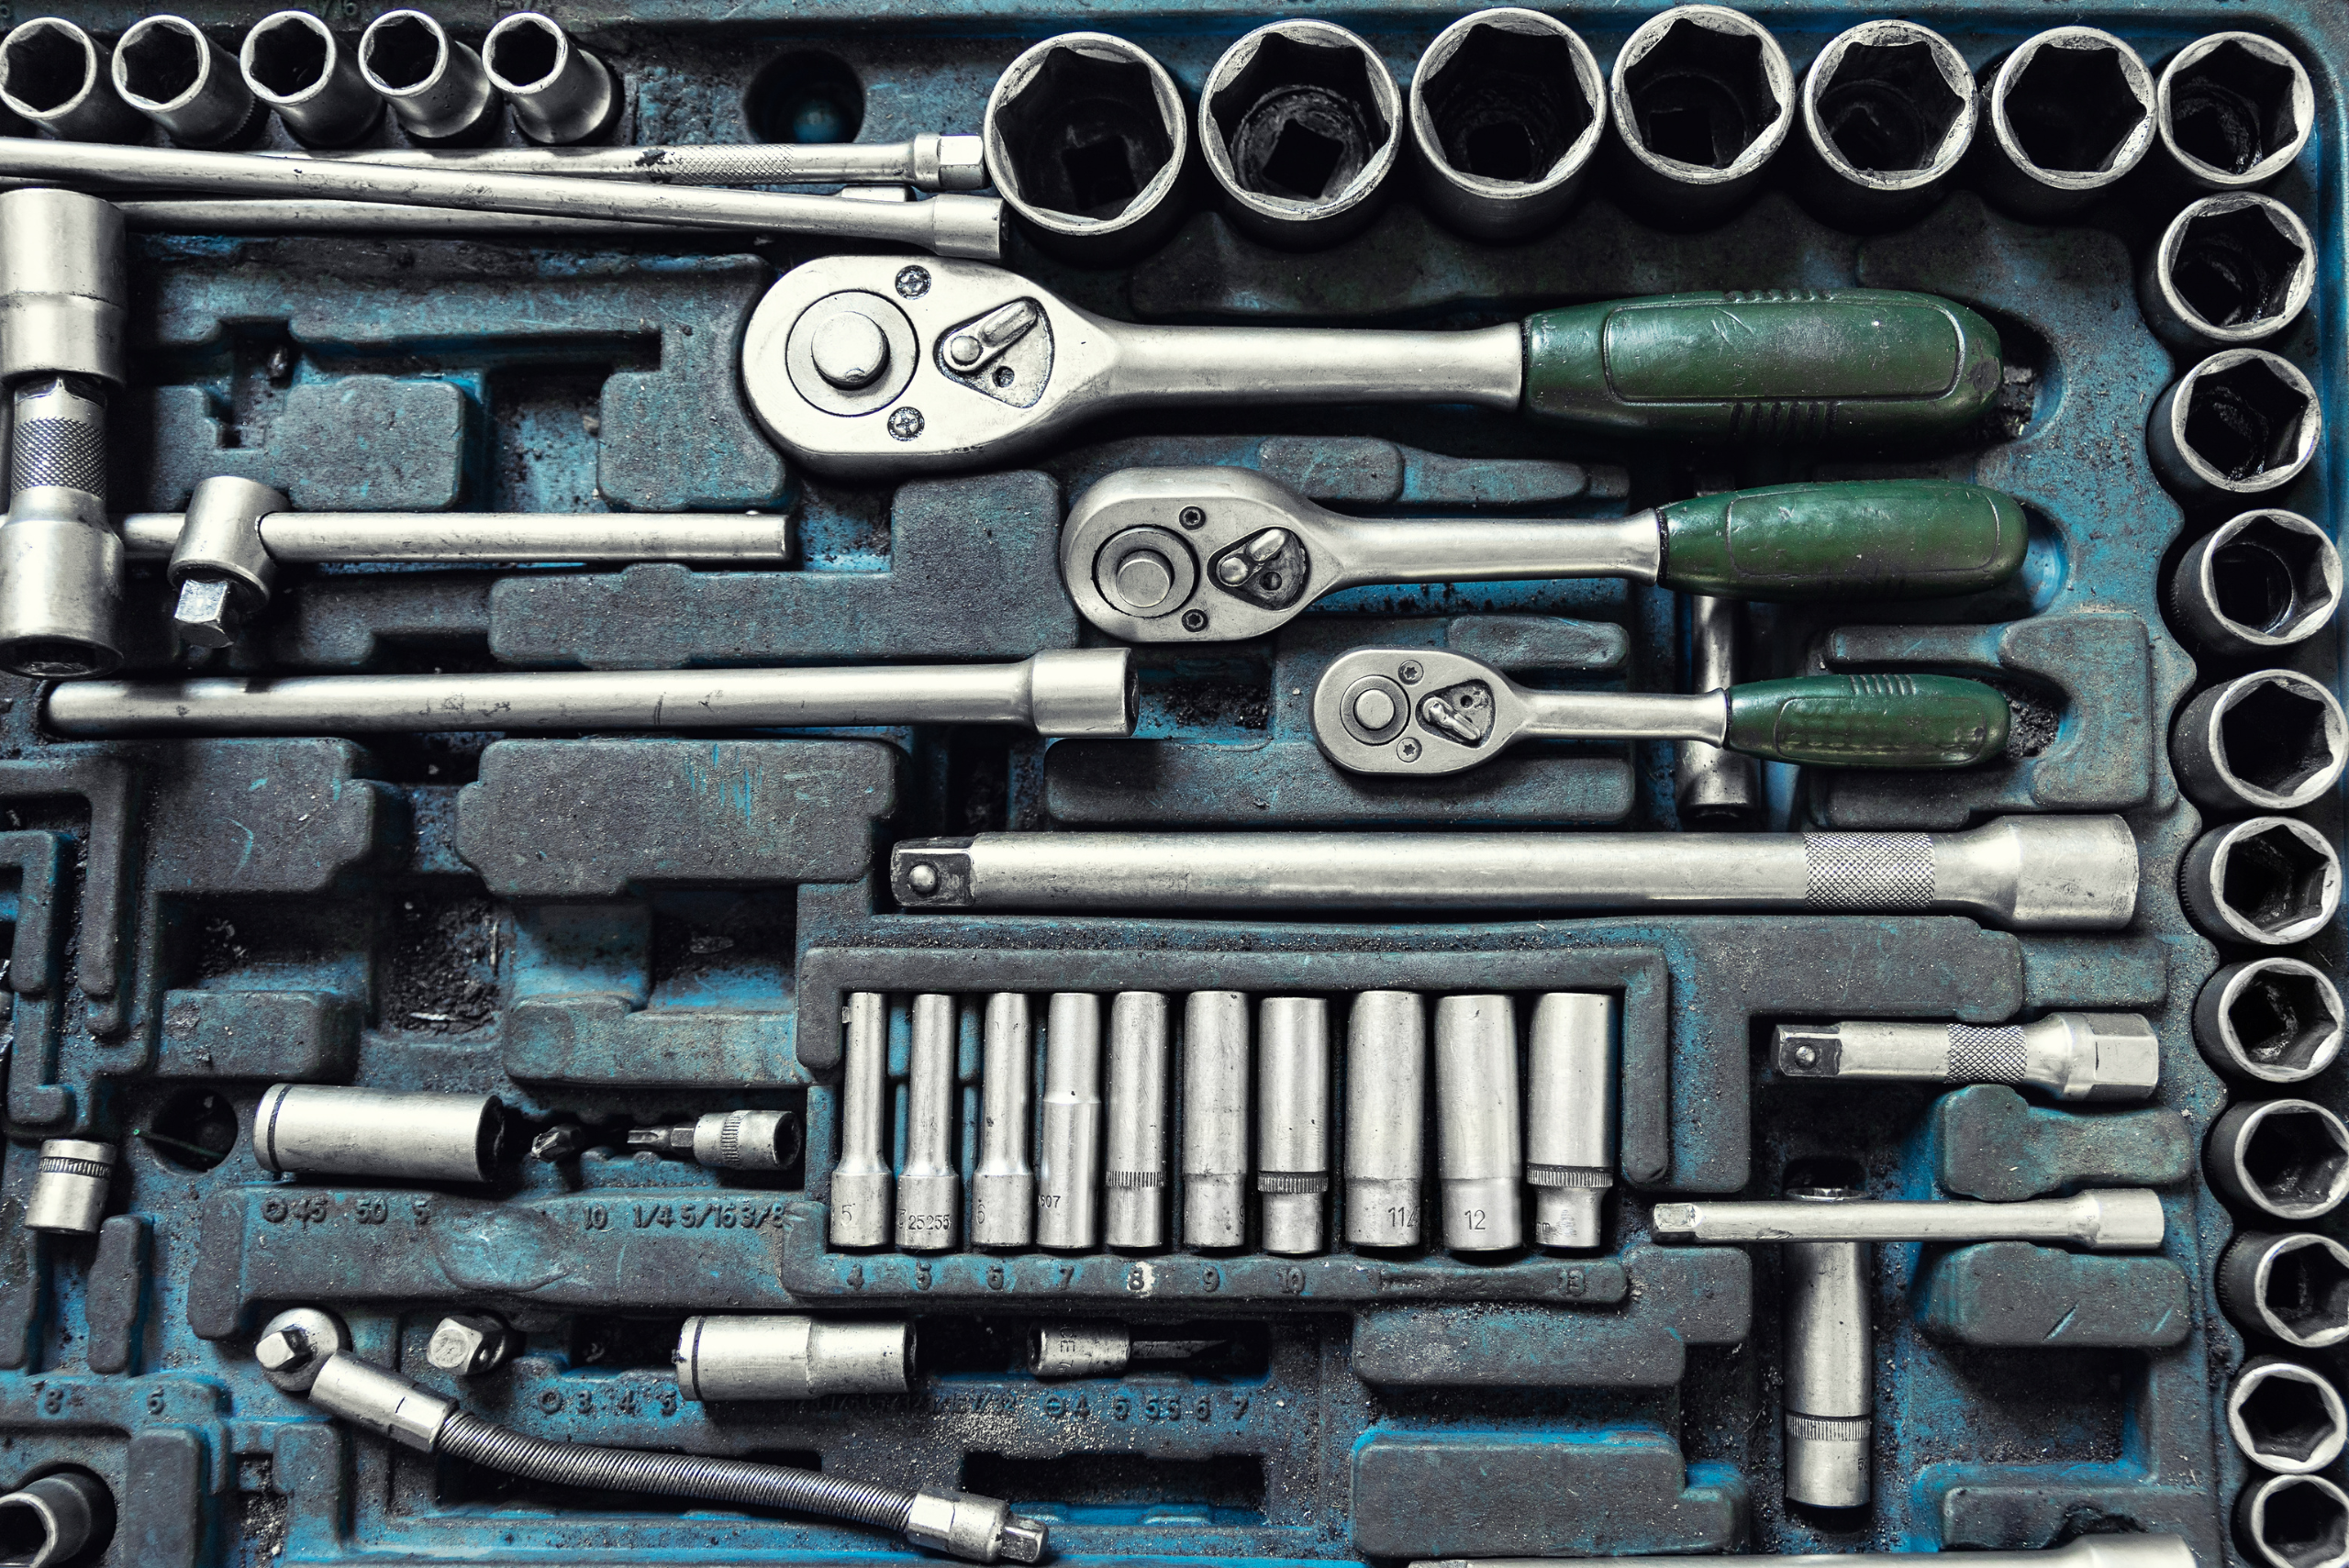 A socket set with missing pieces.